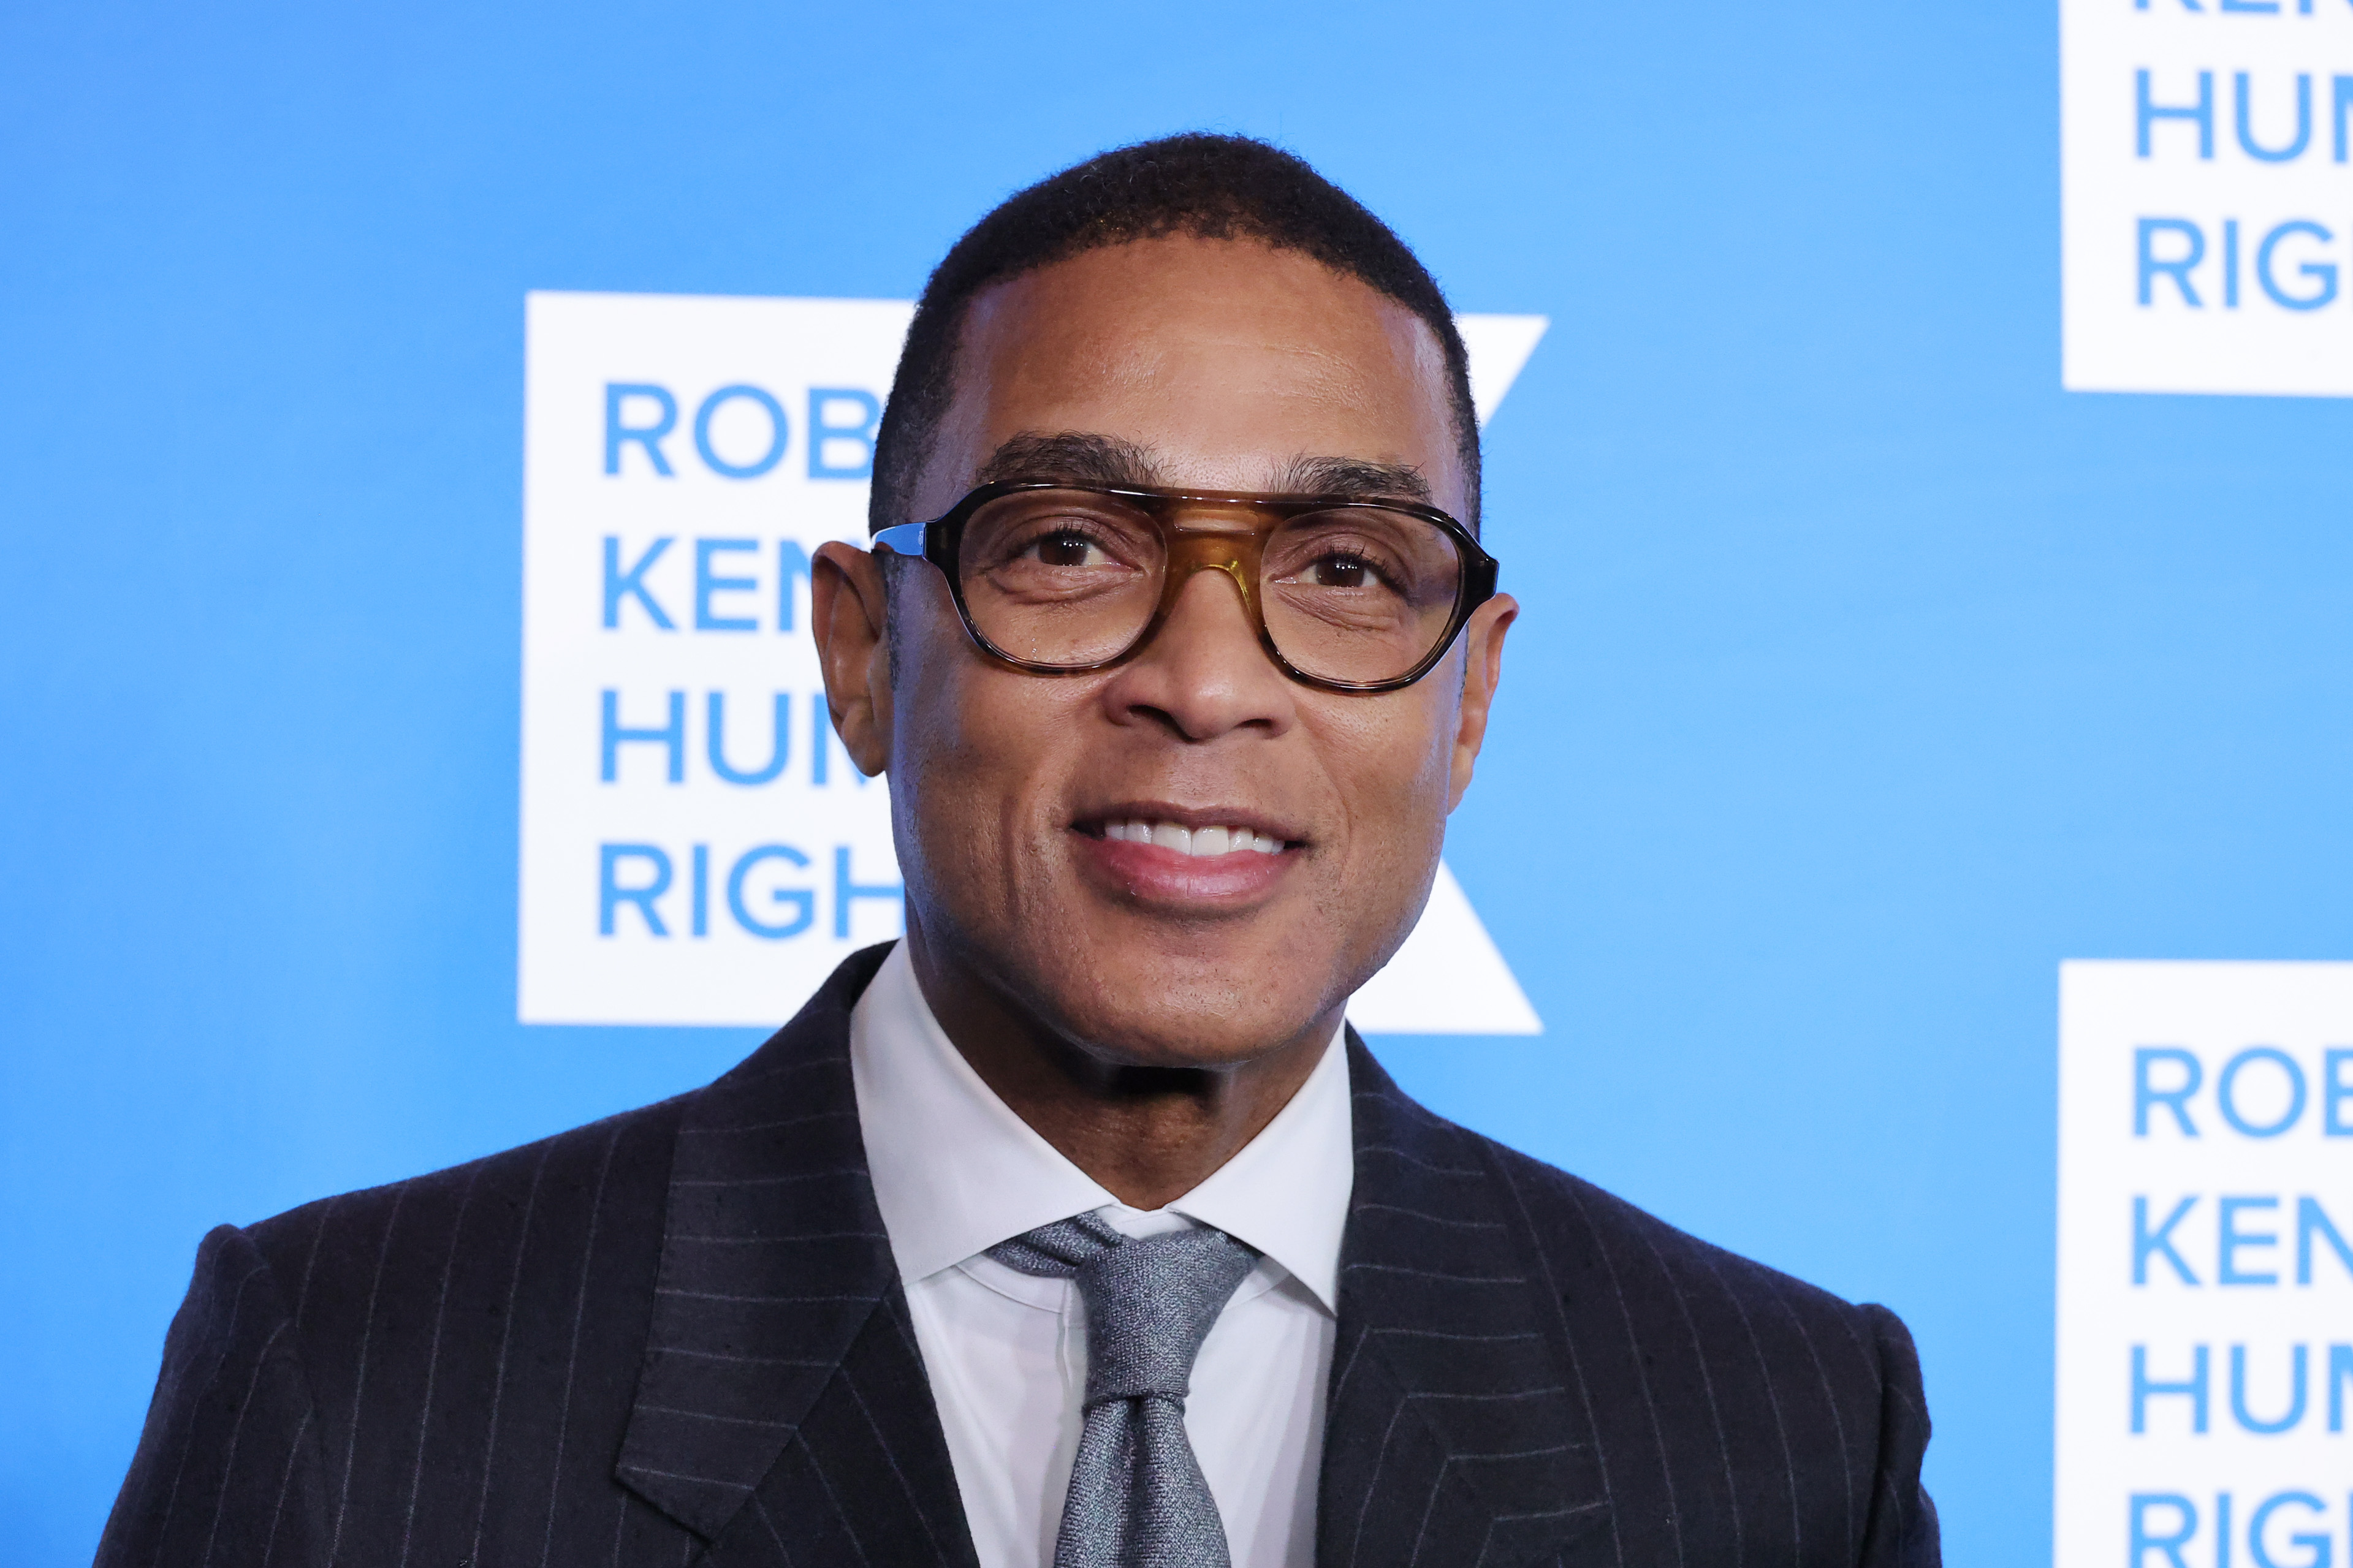 Don Lemon Is Accused of Threatening A CNN Colleague